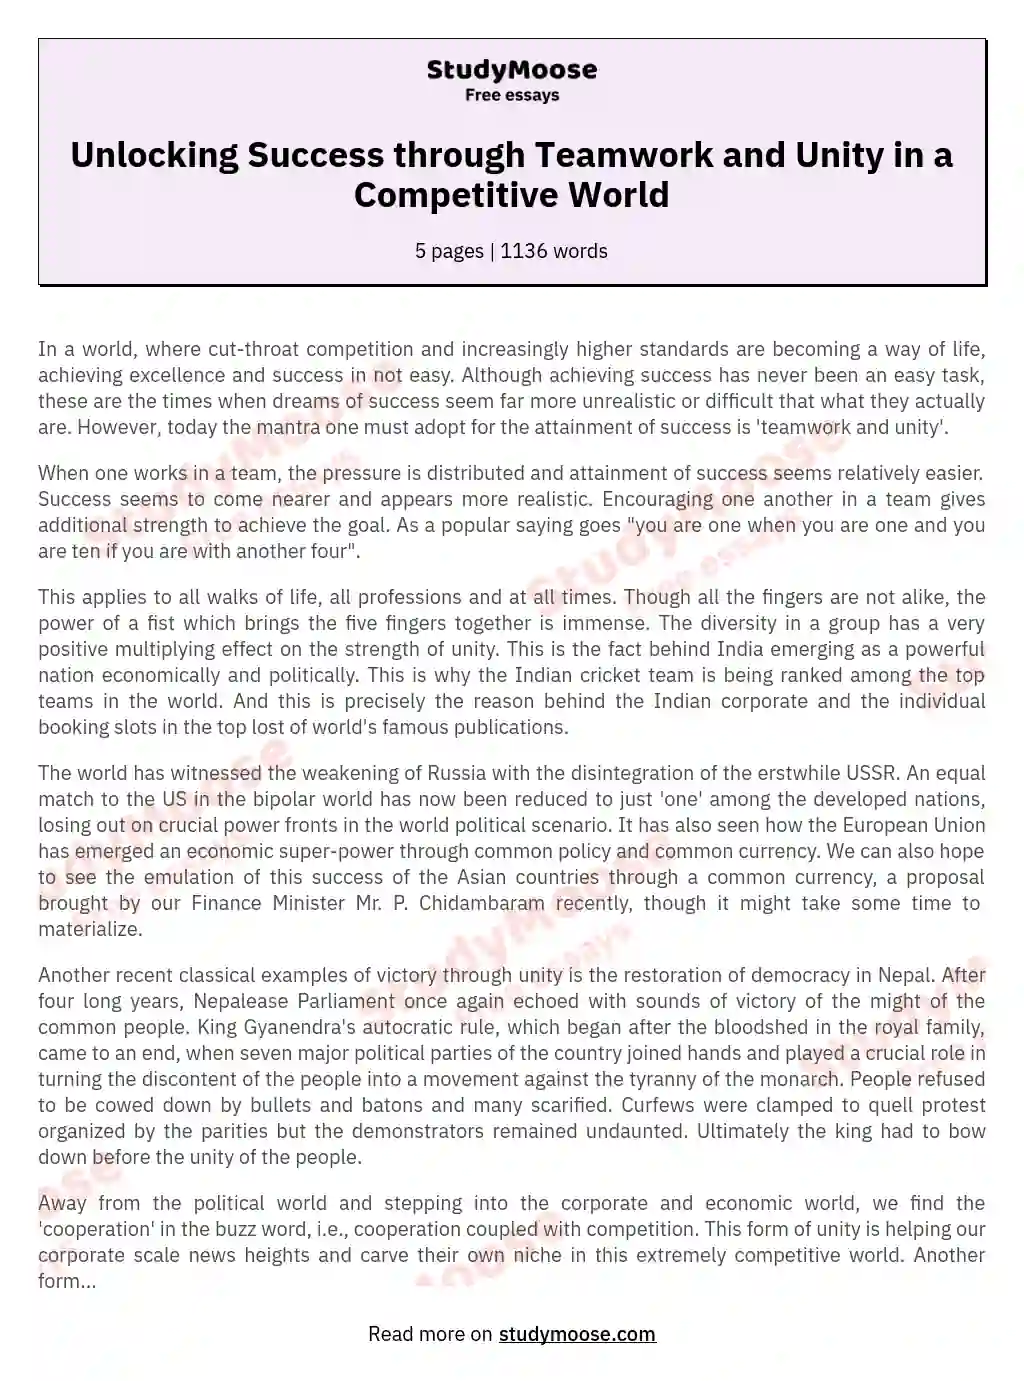 Unlocking Success through Teamwork and Unity in a Competitive World essay